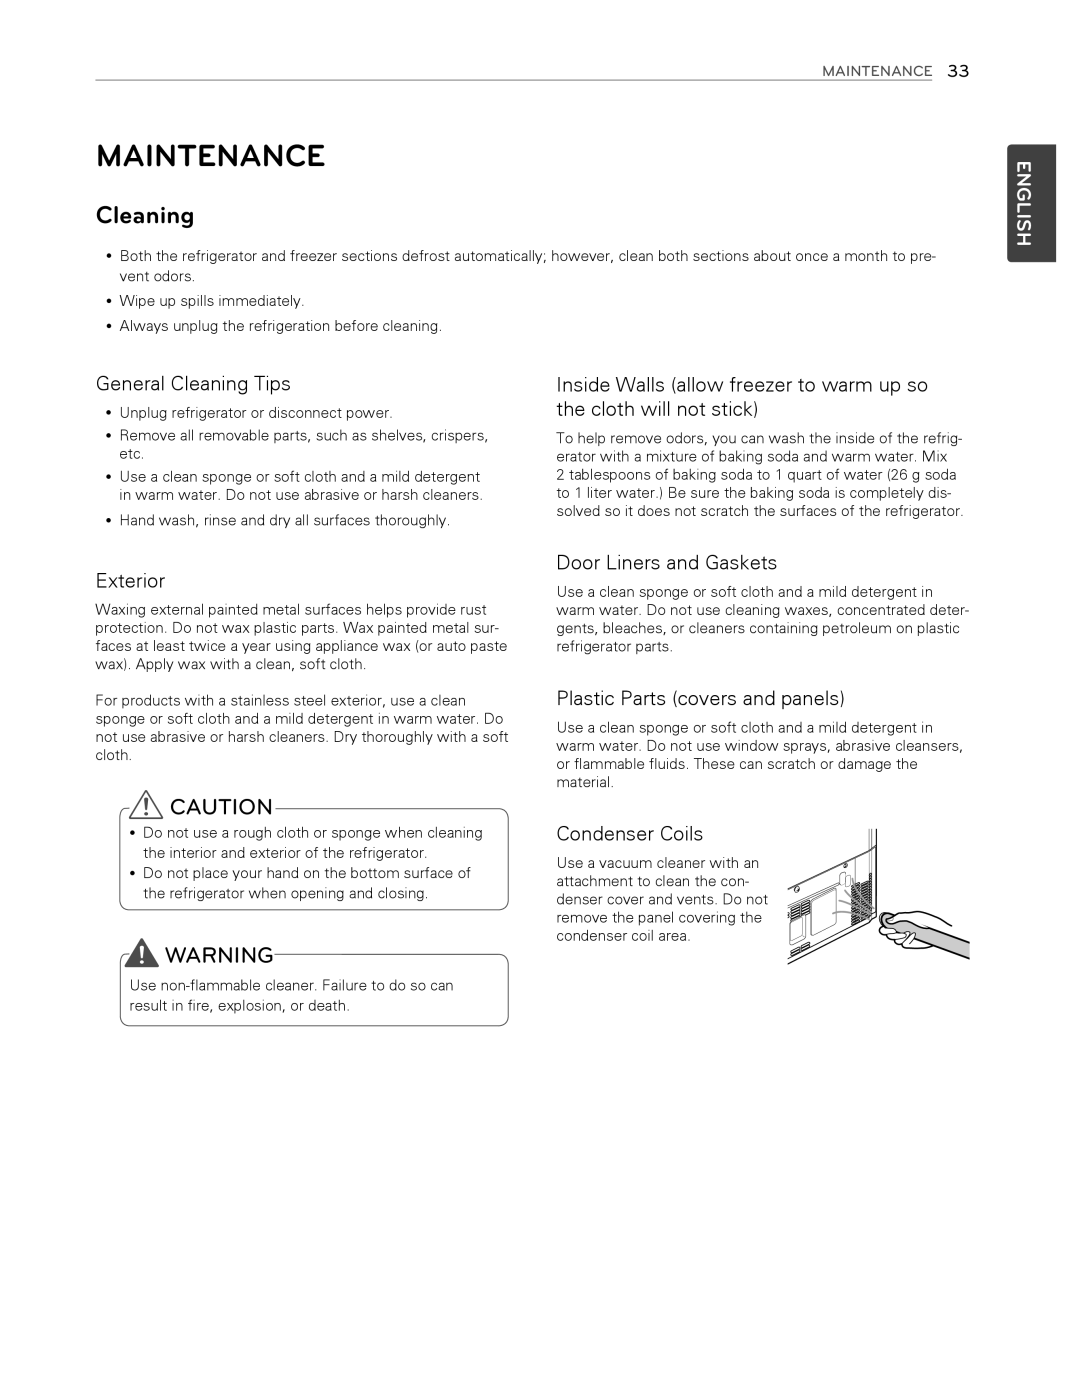 LG Electronics LFX25974ST Maintenance, English, General Cleaning Tips, Exterior, Door Liners and Gaskets, Condenser Coils 